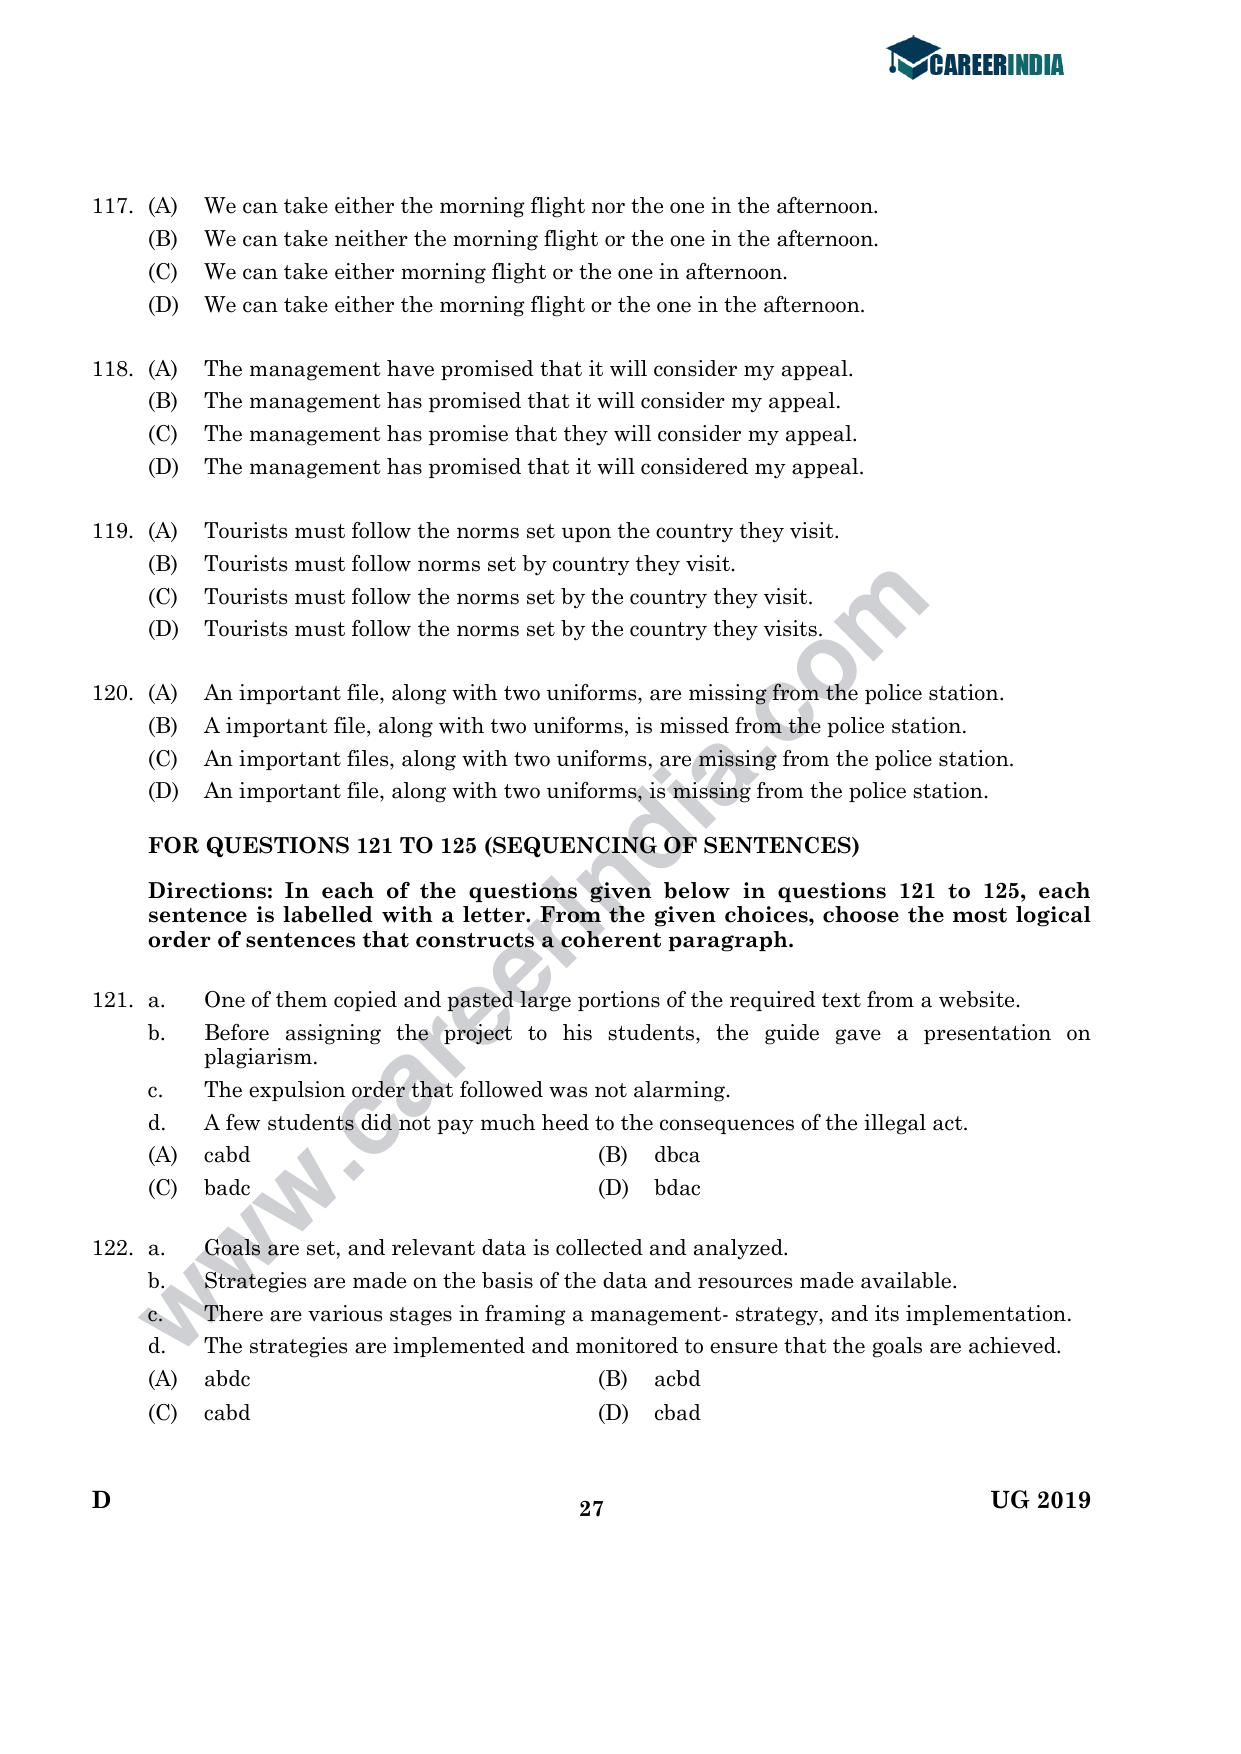 CLAT 2019 UG Logical-Reasoning Question Paper - Page 26